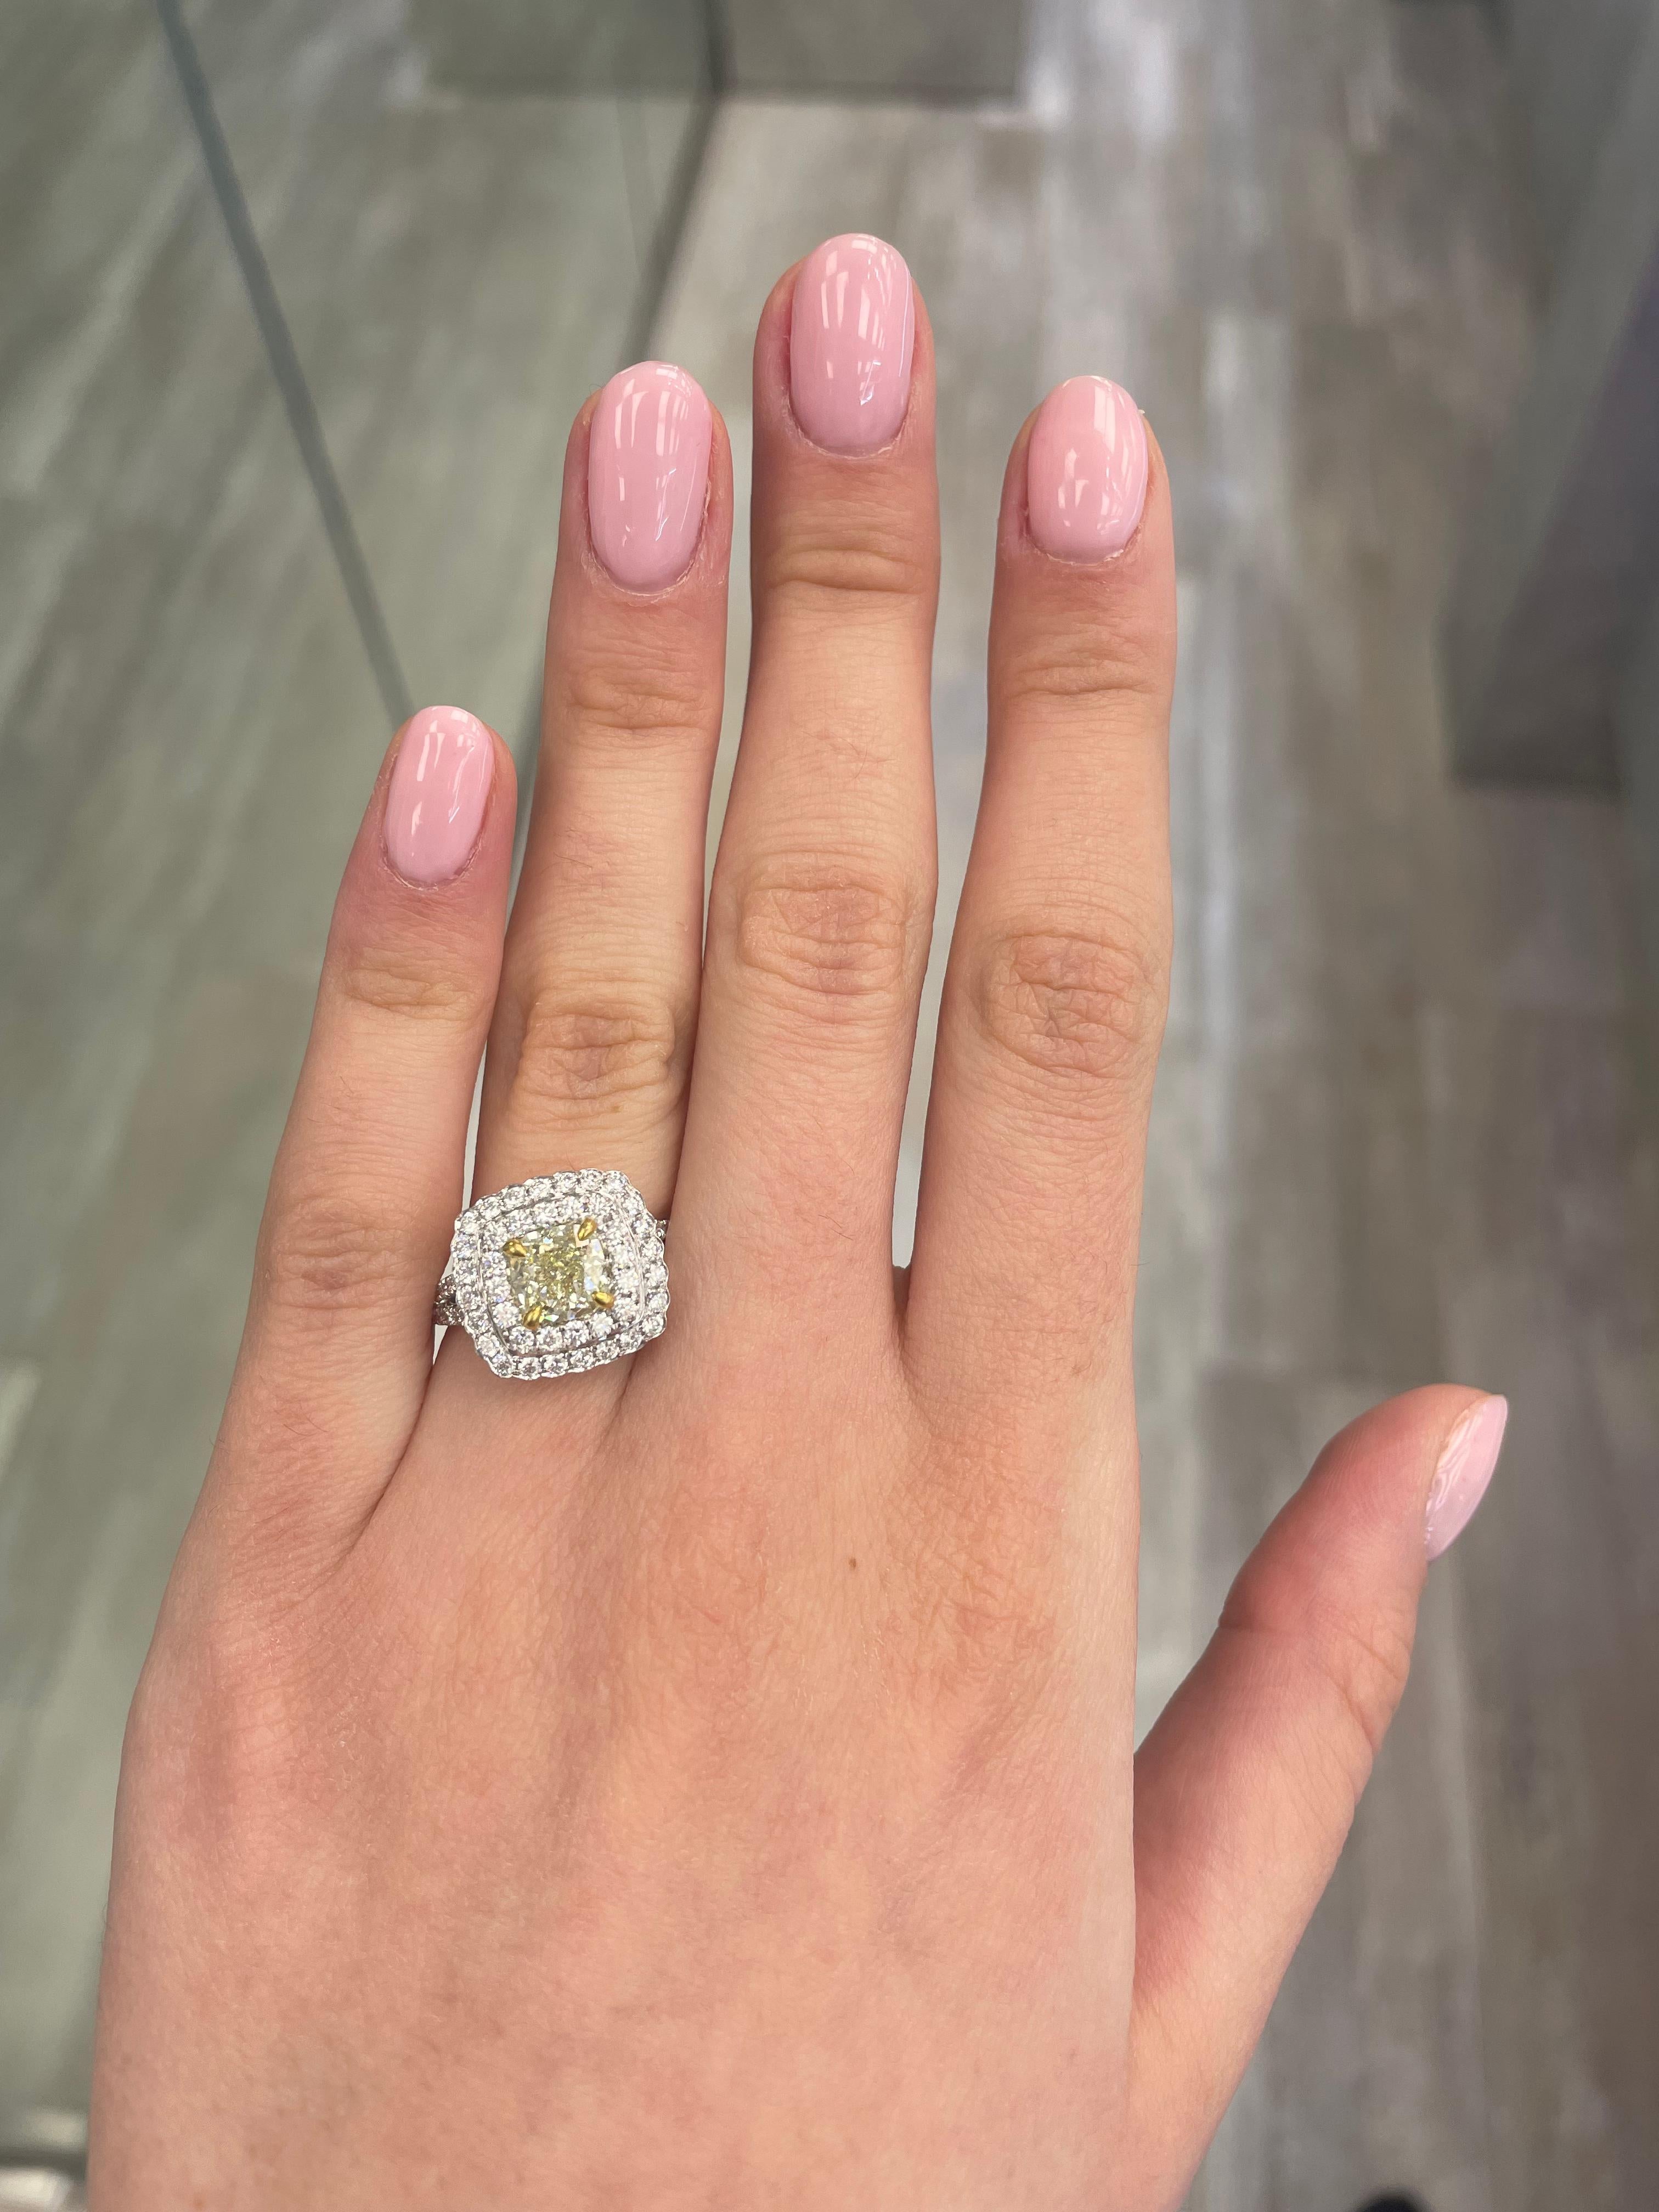 Stunning modern EGL certified yellow diamond double halo ring, two-tone 18k yellow and white gold, split shank. By Alexander Beverly Hills
2.52 carats total diamond weight.
1.52 carat cushion cut Fancy Light Yellow color and VS2 clarity diamond, EGL